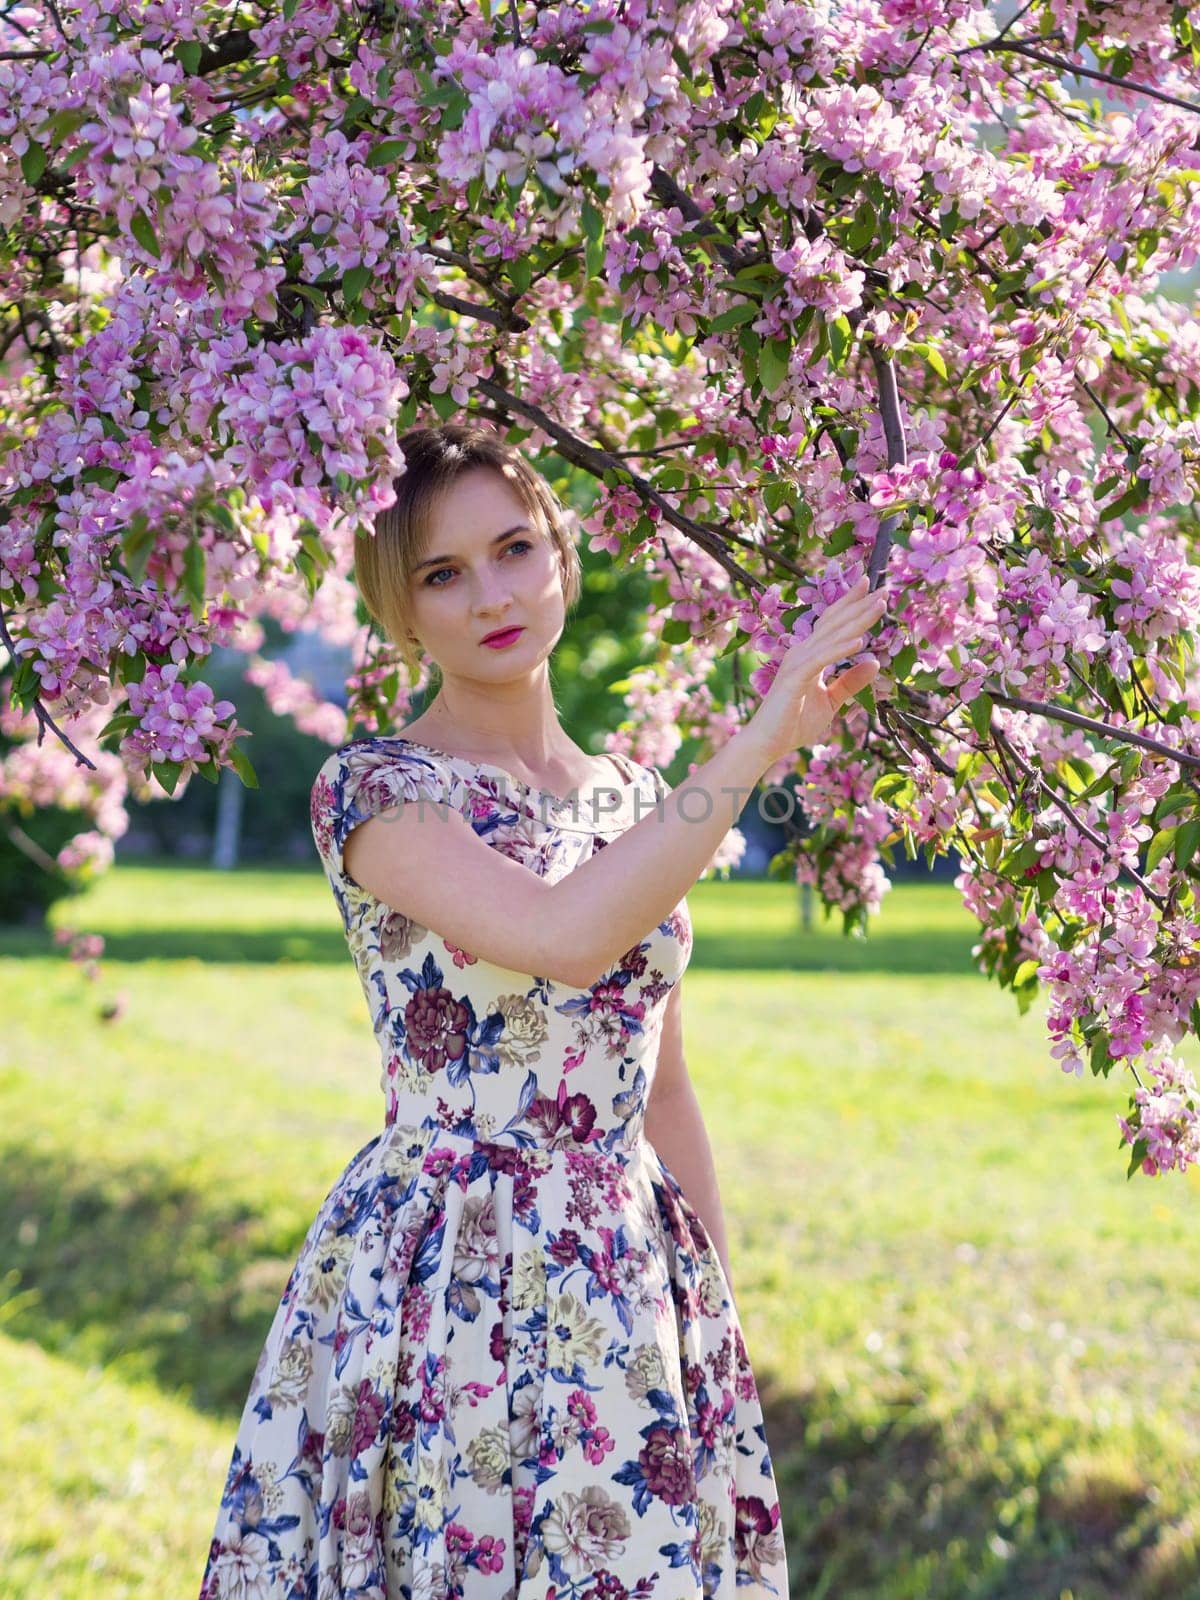 Beautiful young girl in a flowered garden. Tender woman in a dress with a floral print among blooming spring apple trees. by Andre1ns